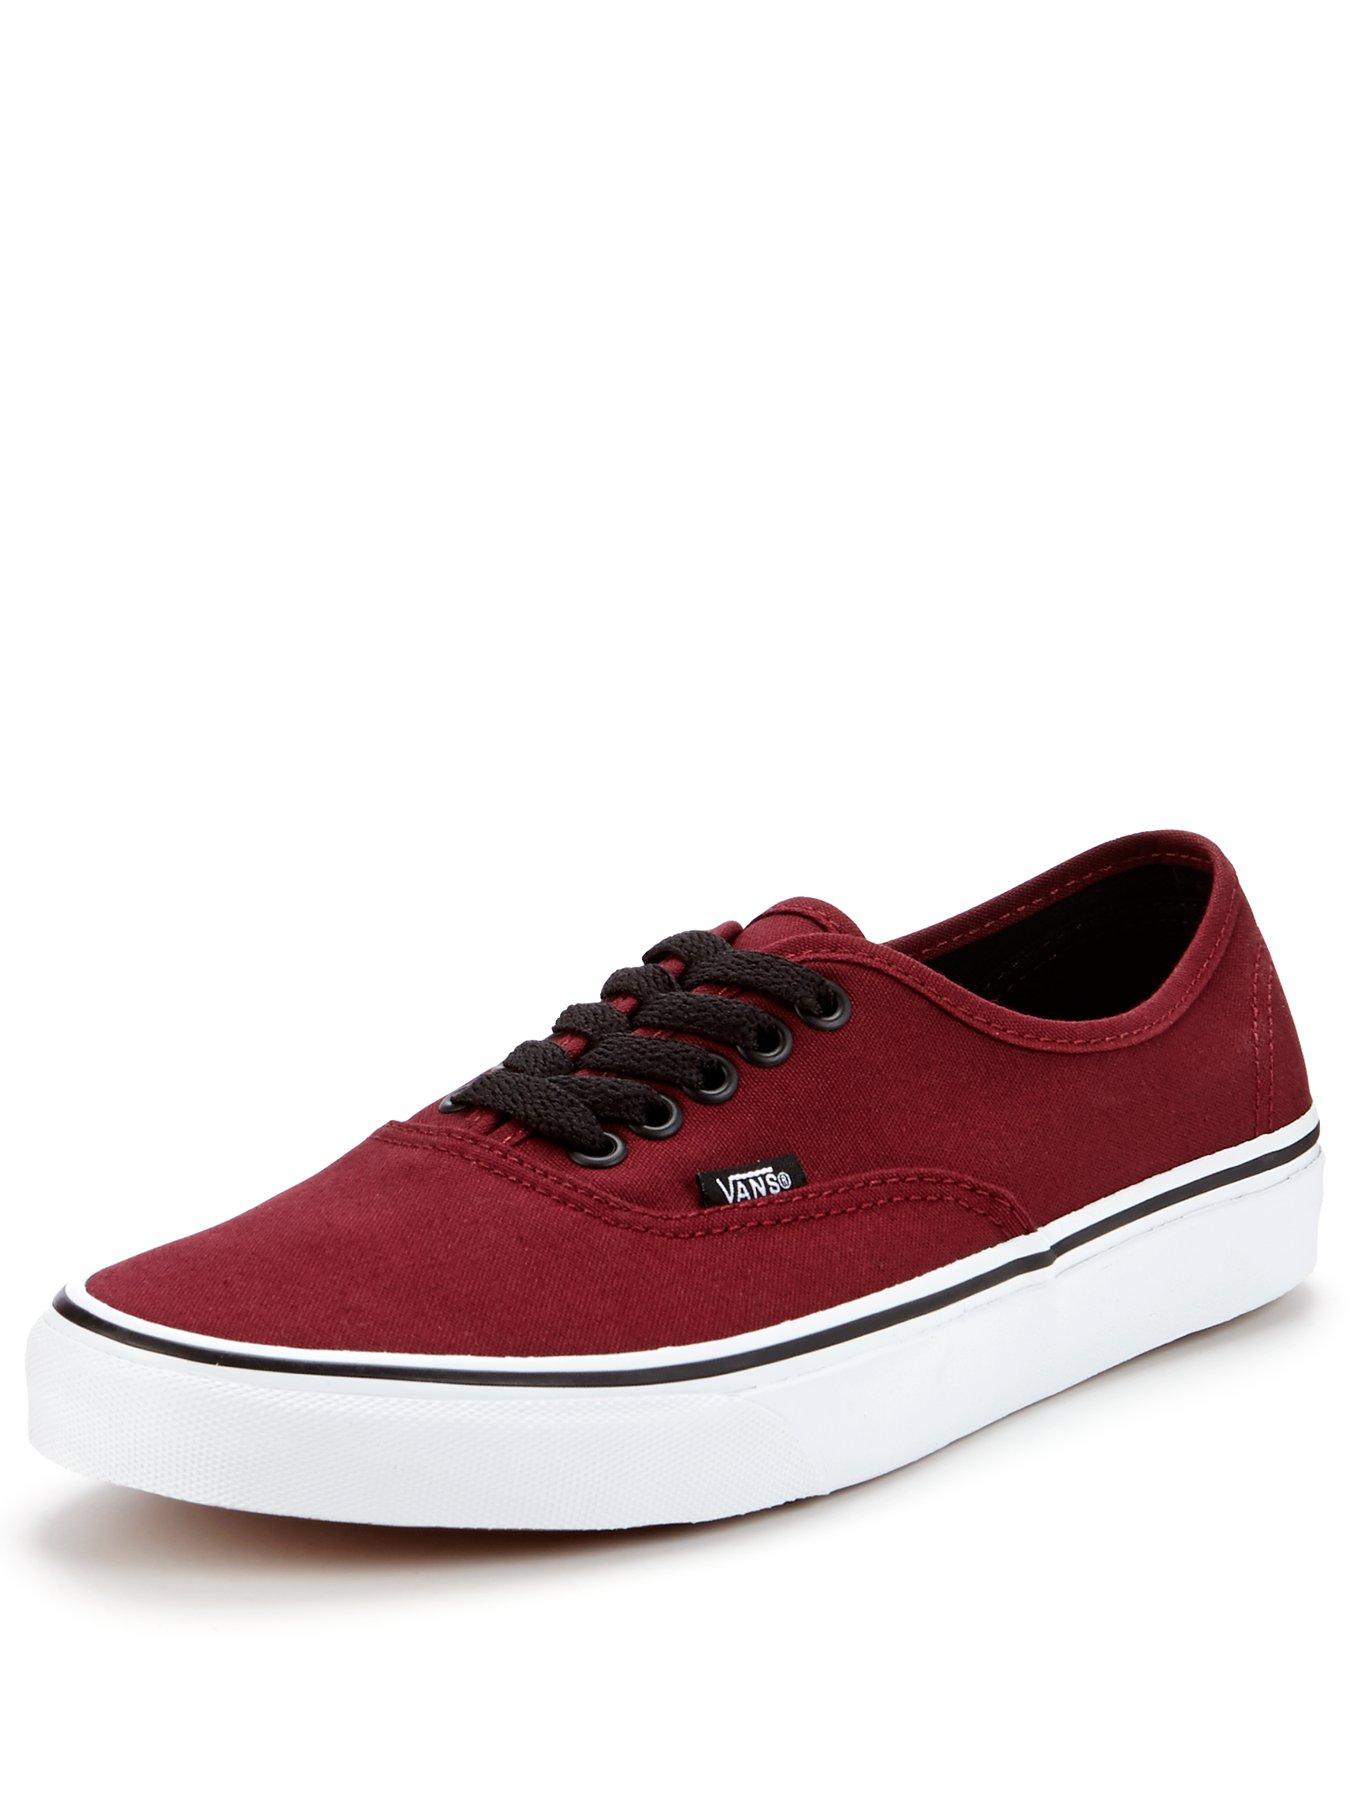 vans maroon and white